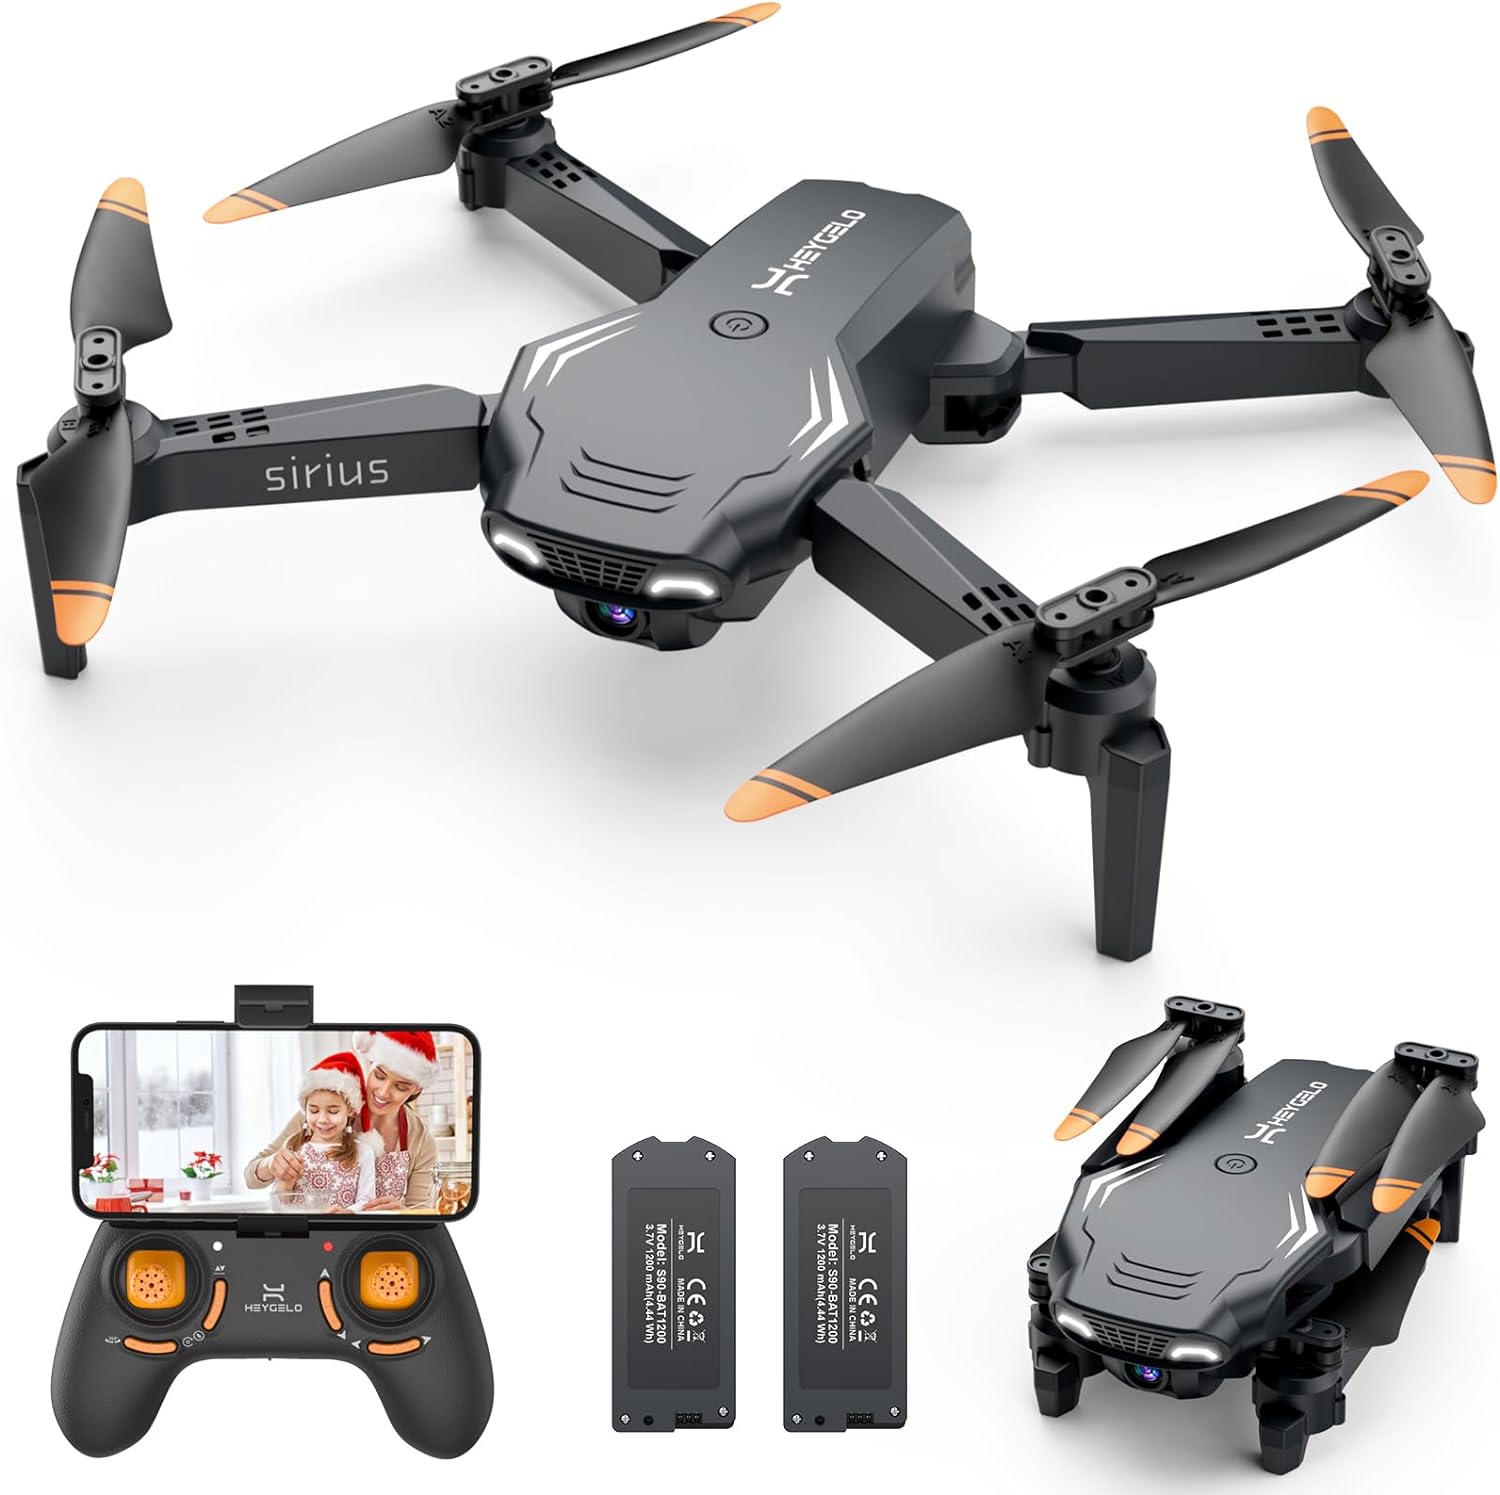 Heygelo S90 Drone With Camera For Adults, 1080P Hd Mini Fpv Drones For Kids Beginners, Foldable Rc Quadcopter Toys Gifts With Altitude Hold, Voice/Gesture Control, 3 Speeds, 2 Batteries